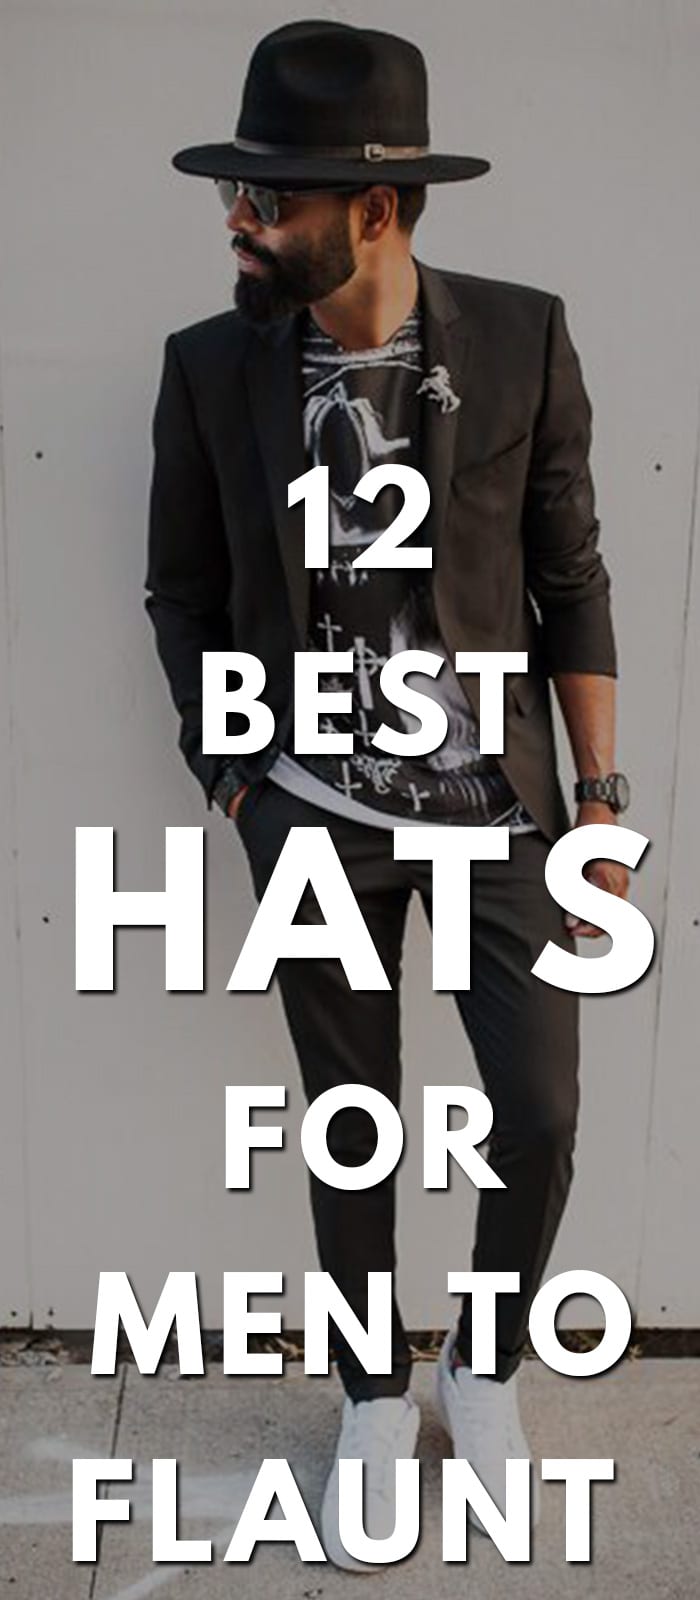 12 Hats For Men To Flaunt